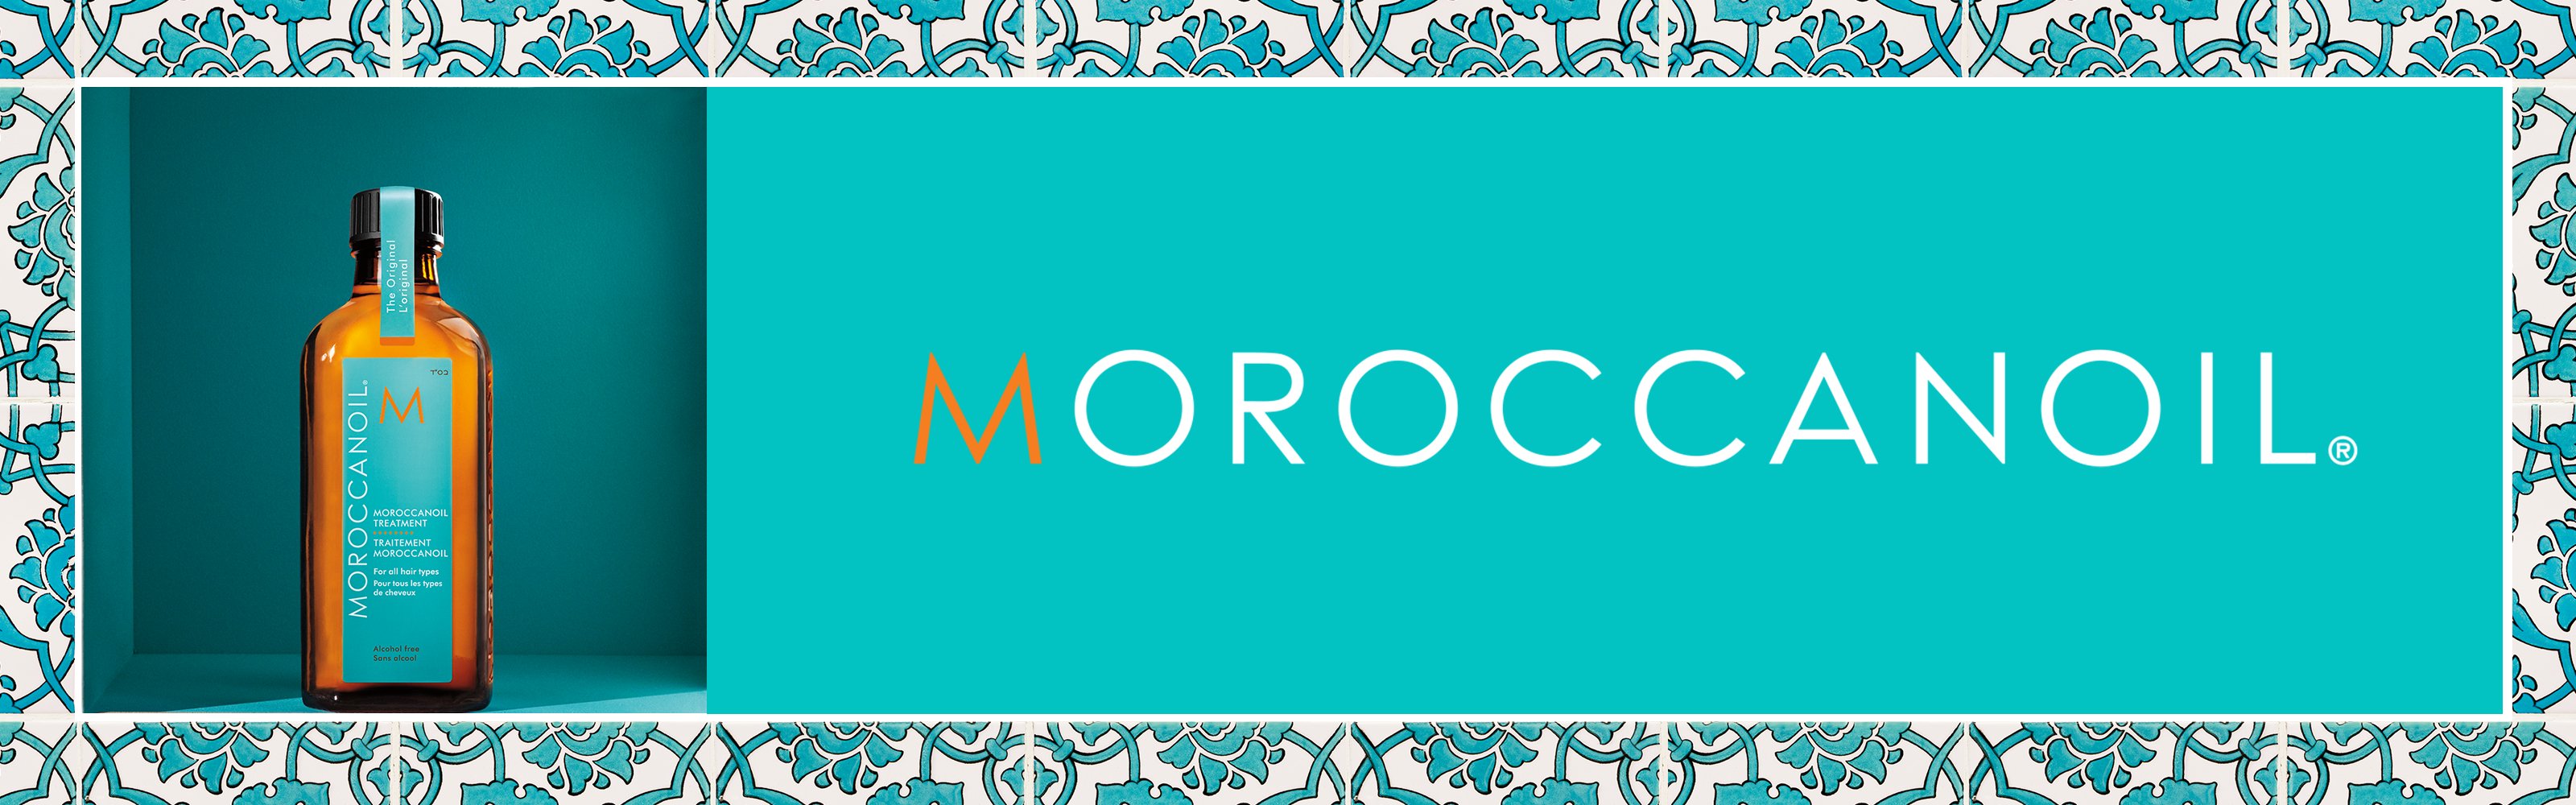 Moroccan Oil Official Brand Store